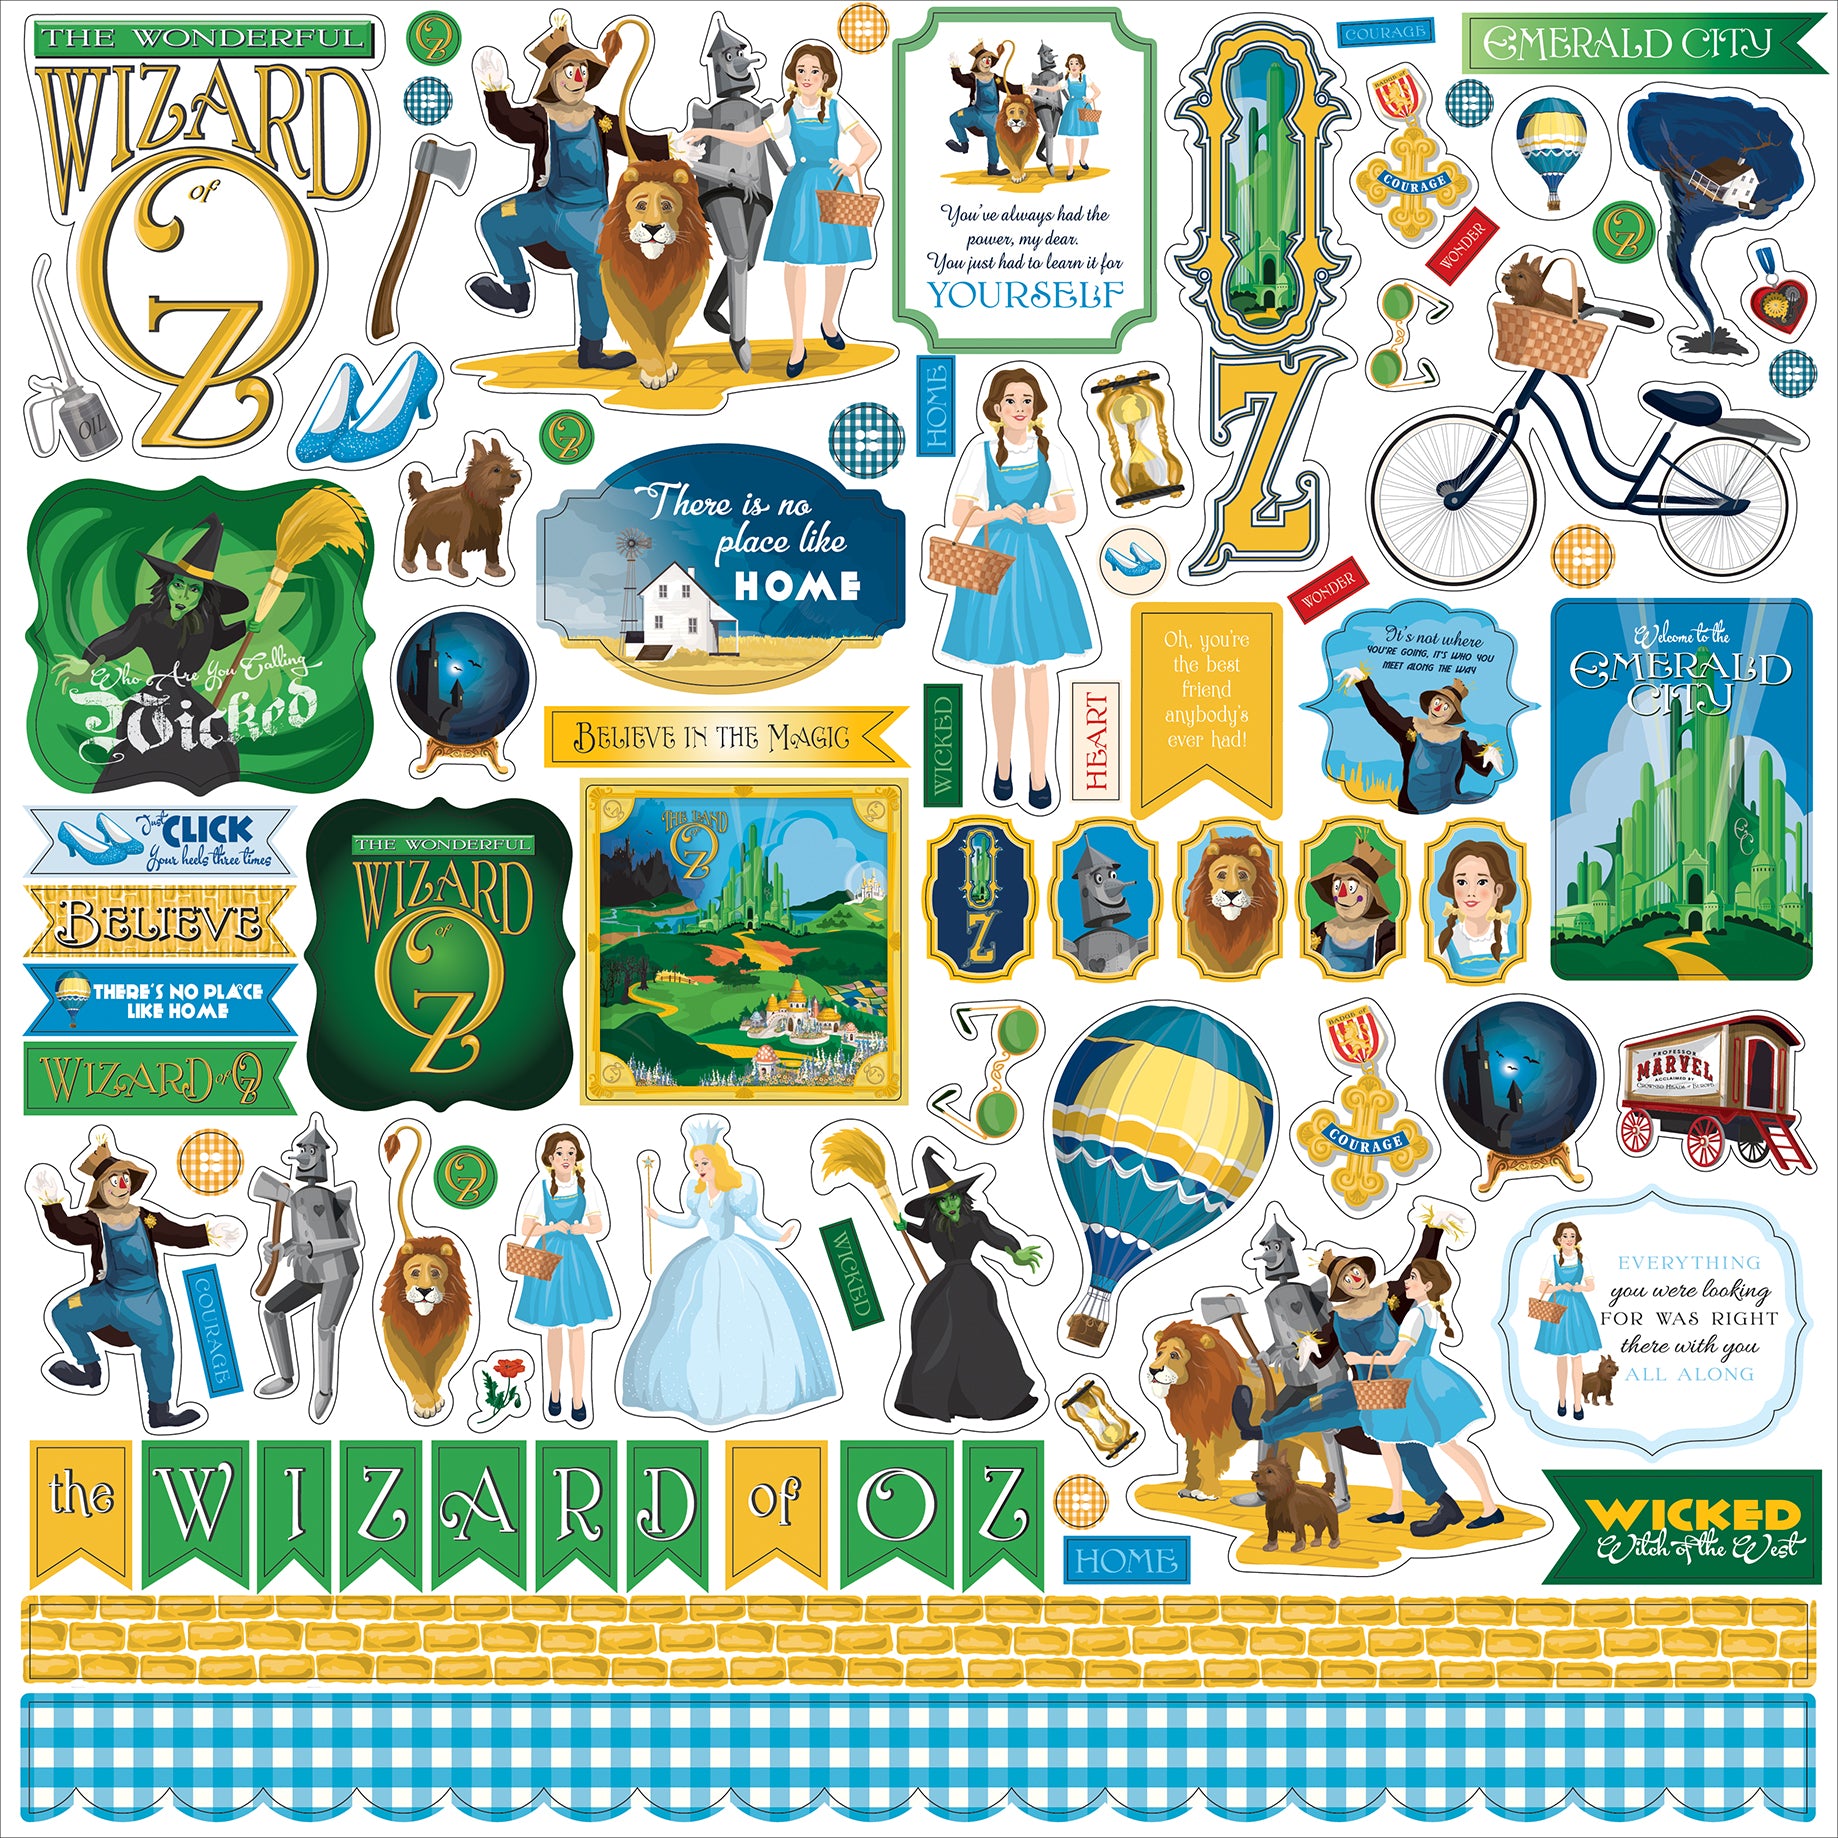 The Wizard of Oz Collection 12 x 12 Scrapbook Collection Kit by Carta Bella